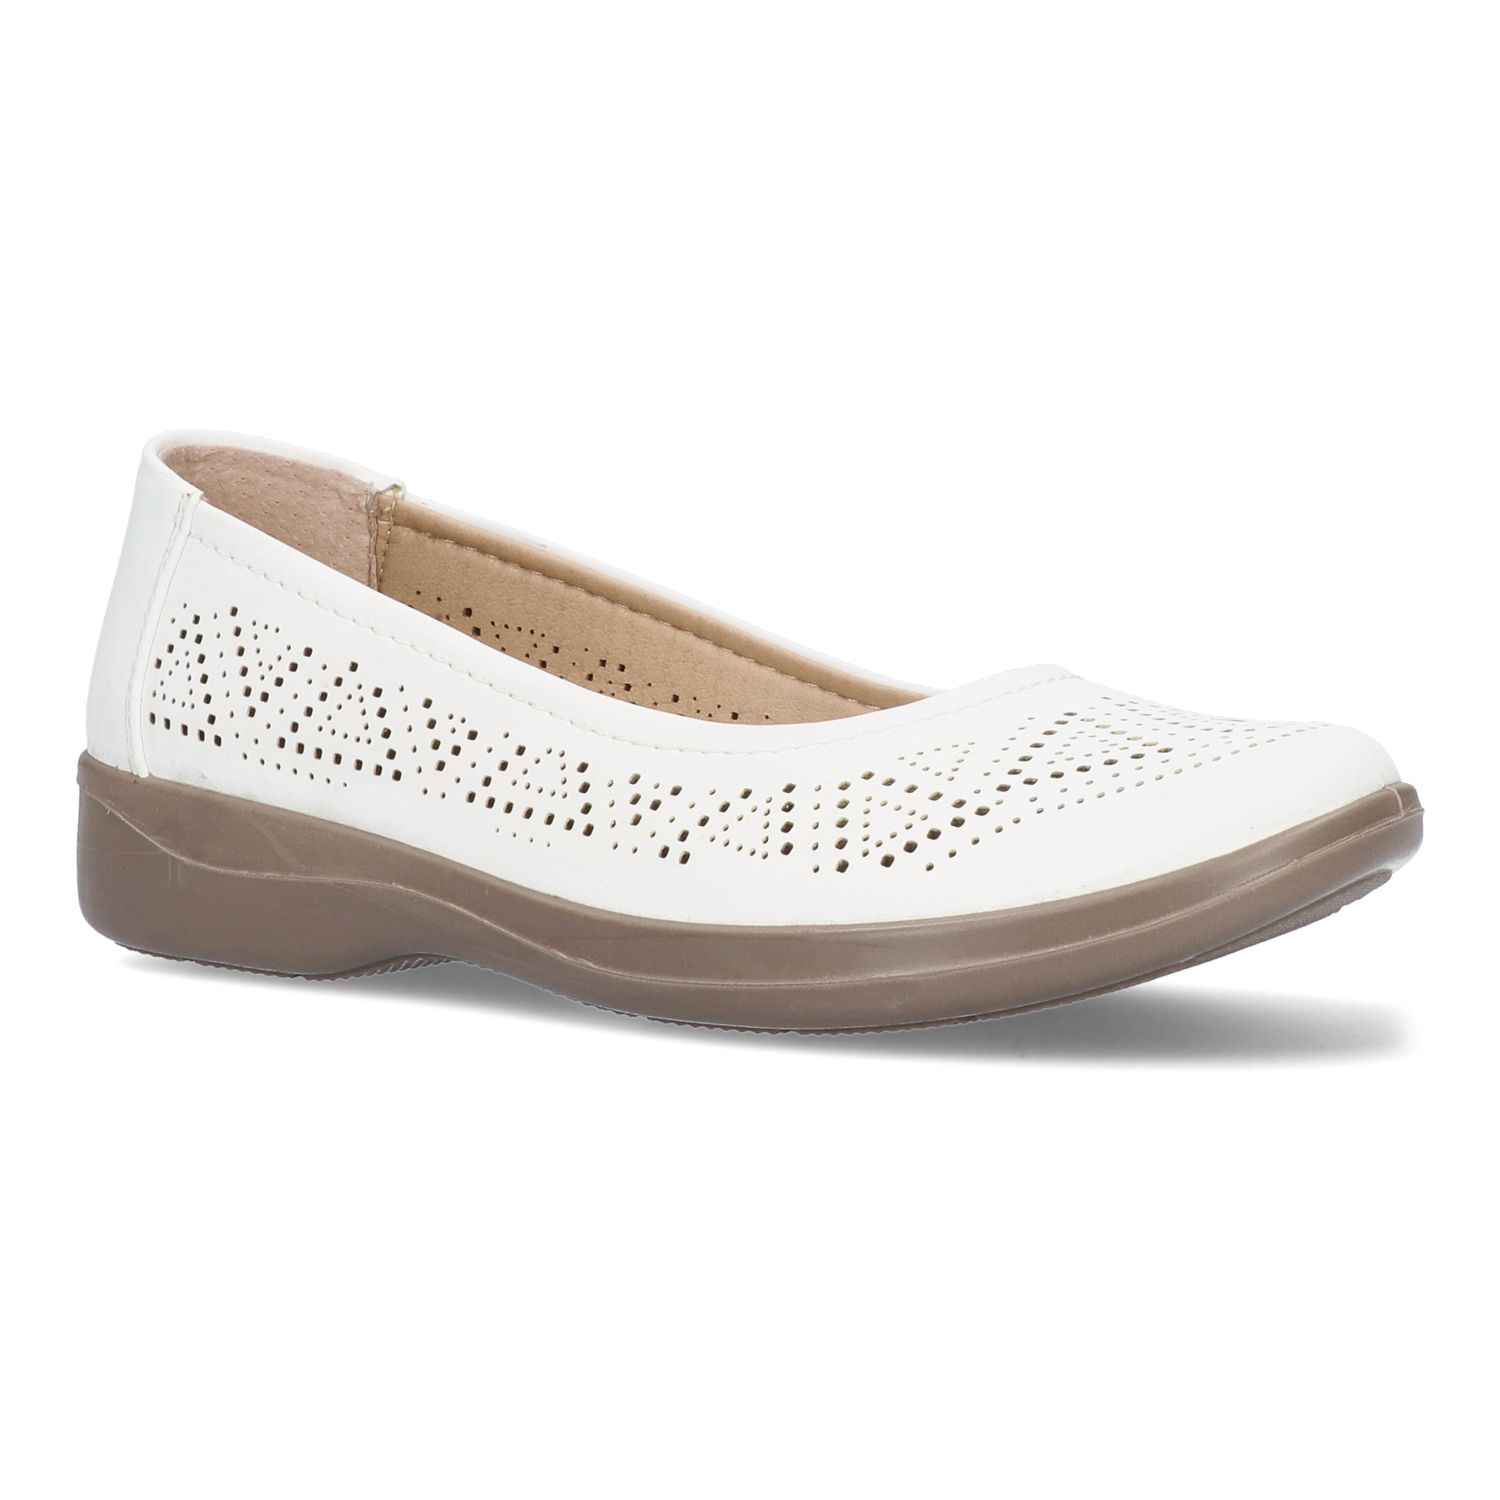 Image for Easy Street Tex Women's Flats at Kohl's.